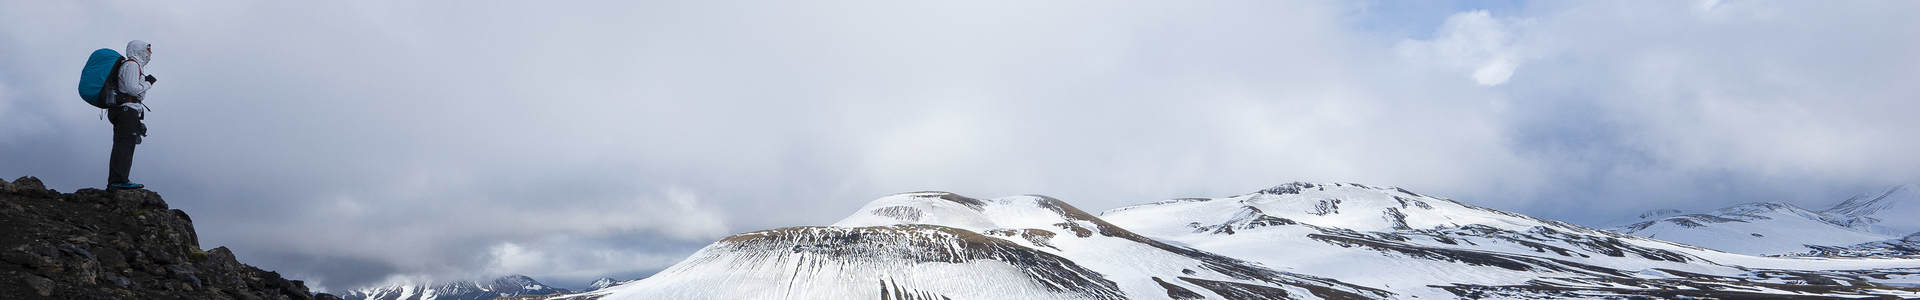 Collection 'Listening' cover photo; a view of Iceland's mountains